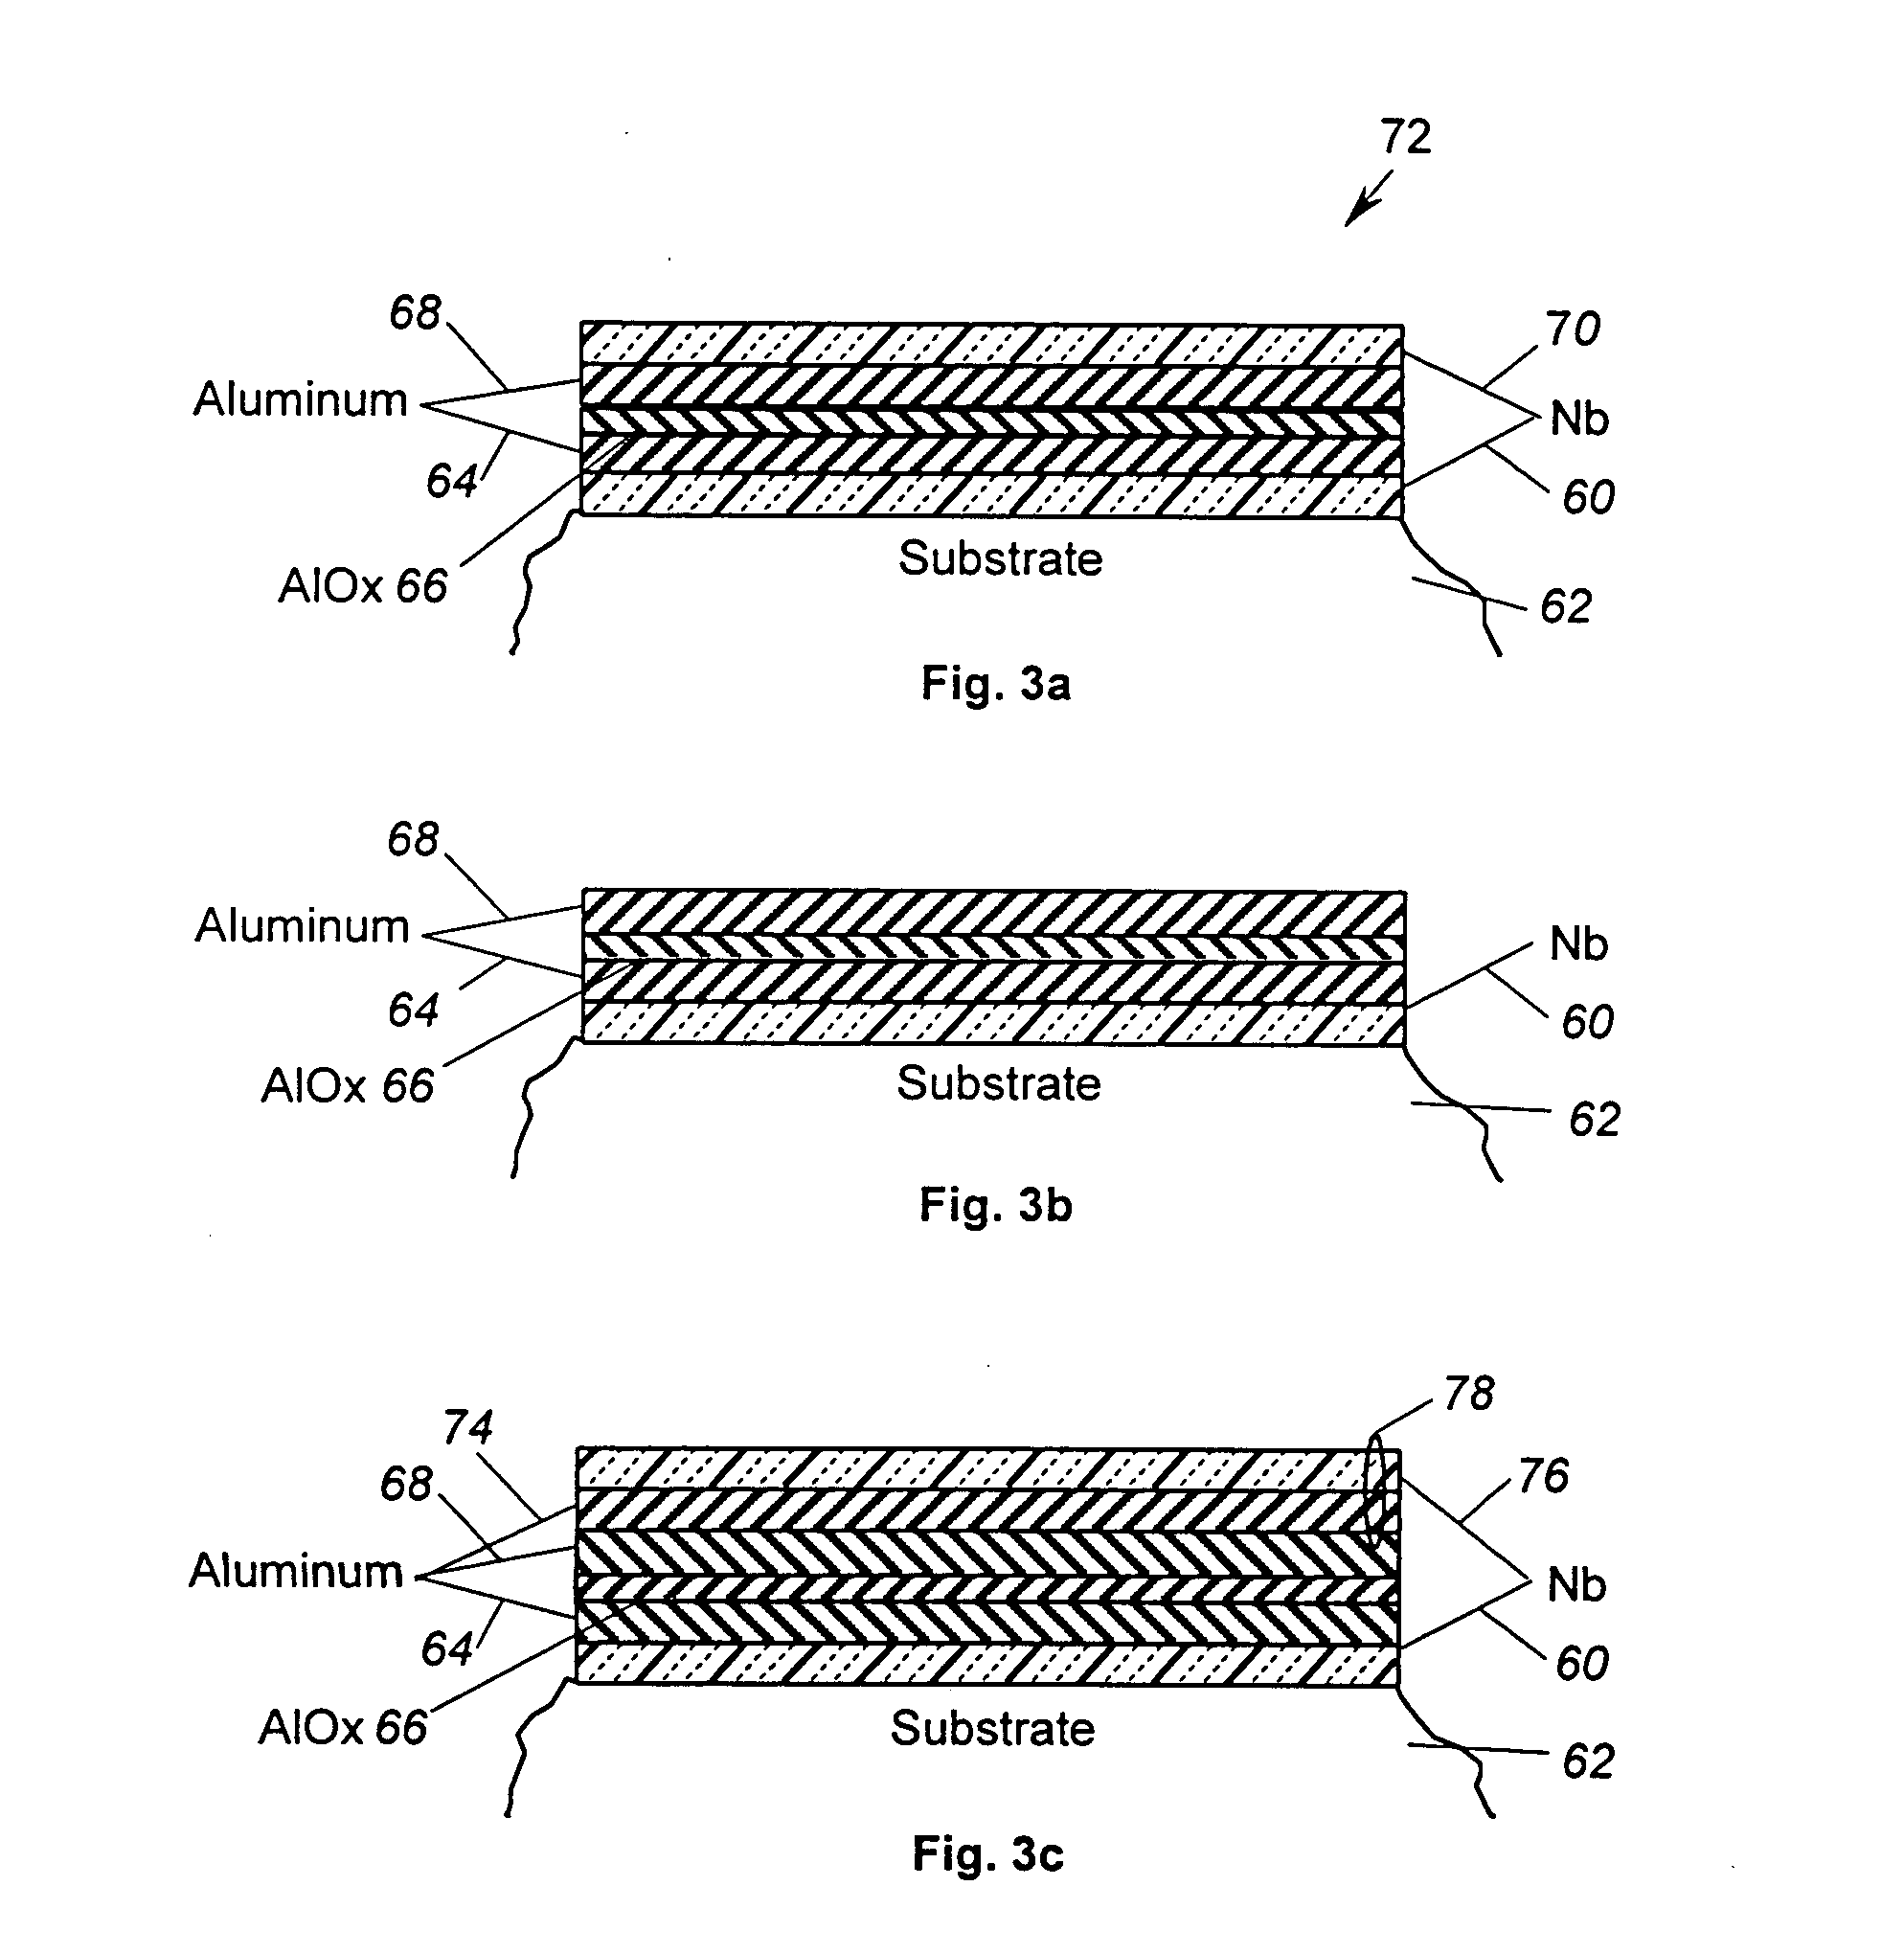 A1/A1Ox/A1 resistor process for integrated circuits